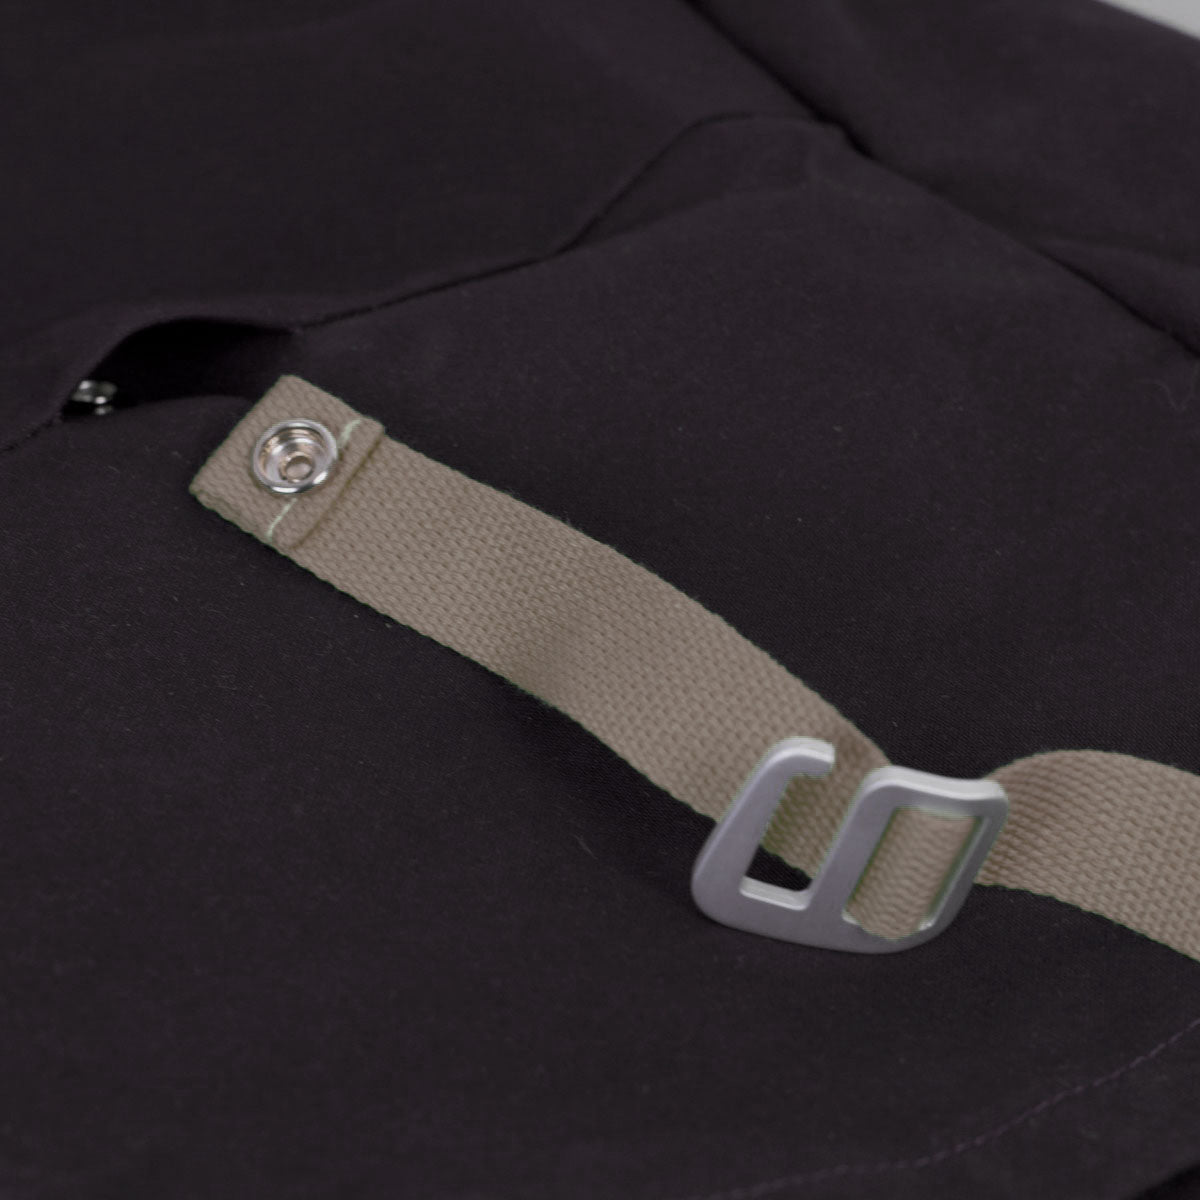 Closure strap for The Rolltop